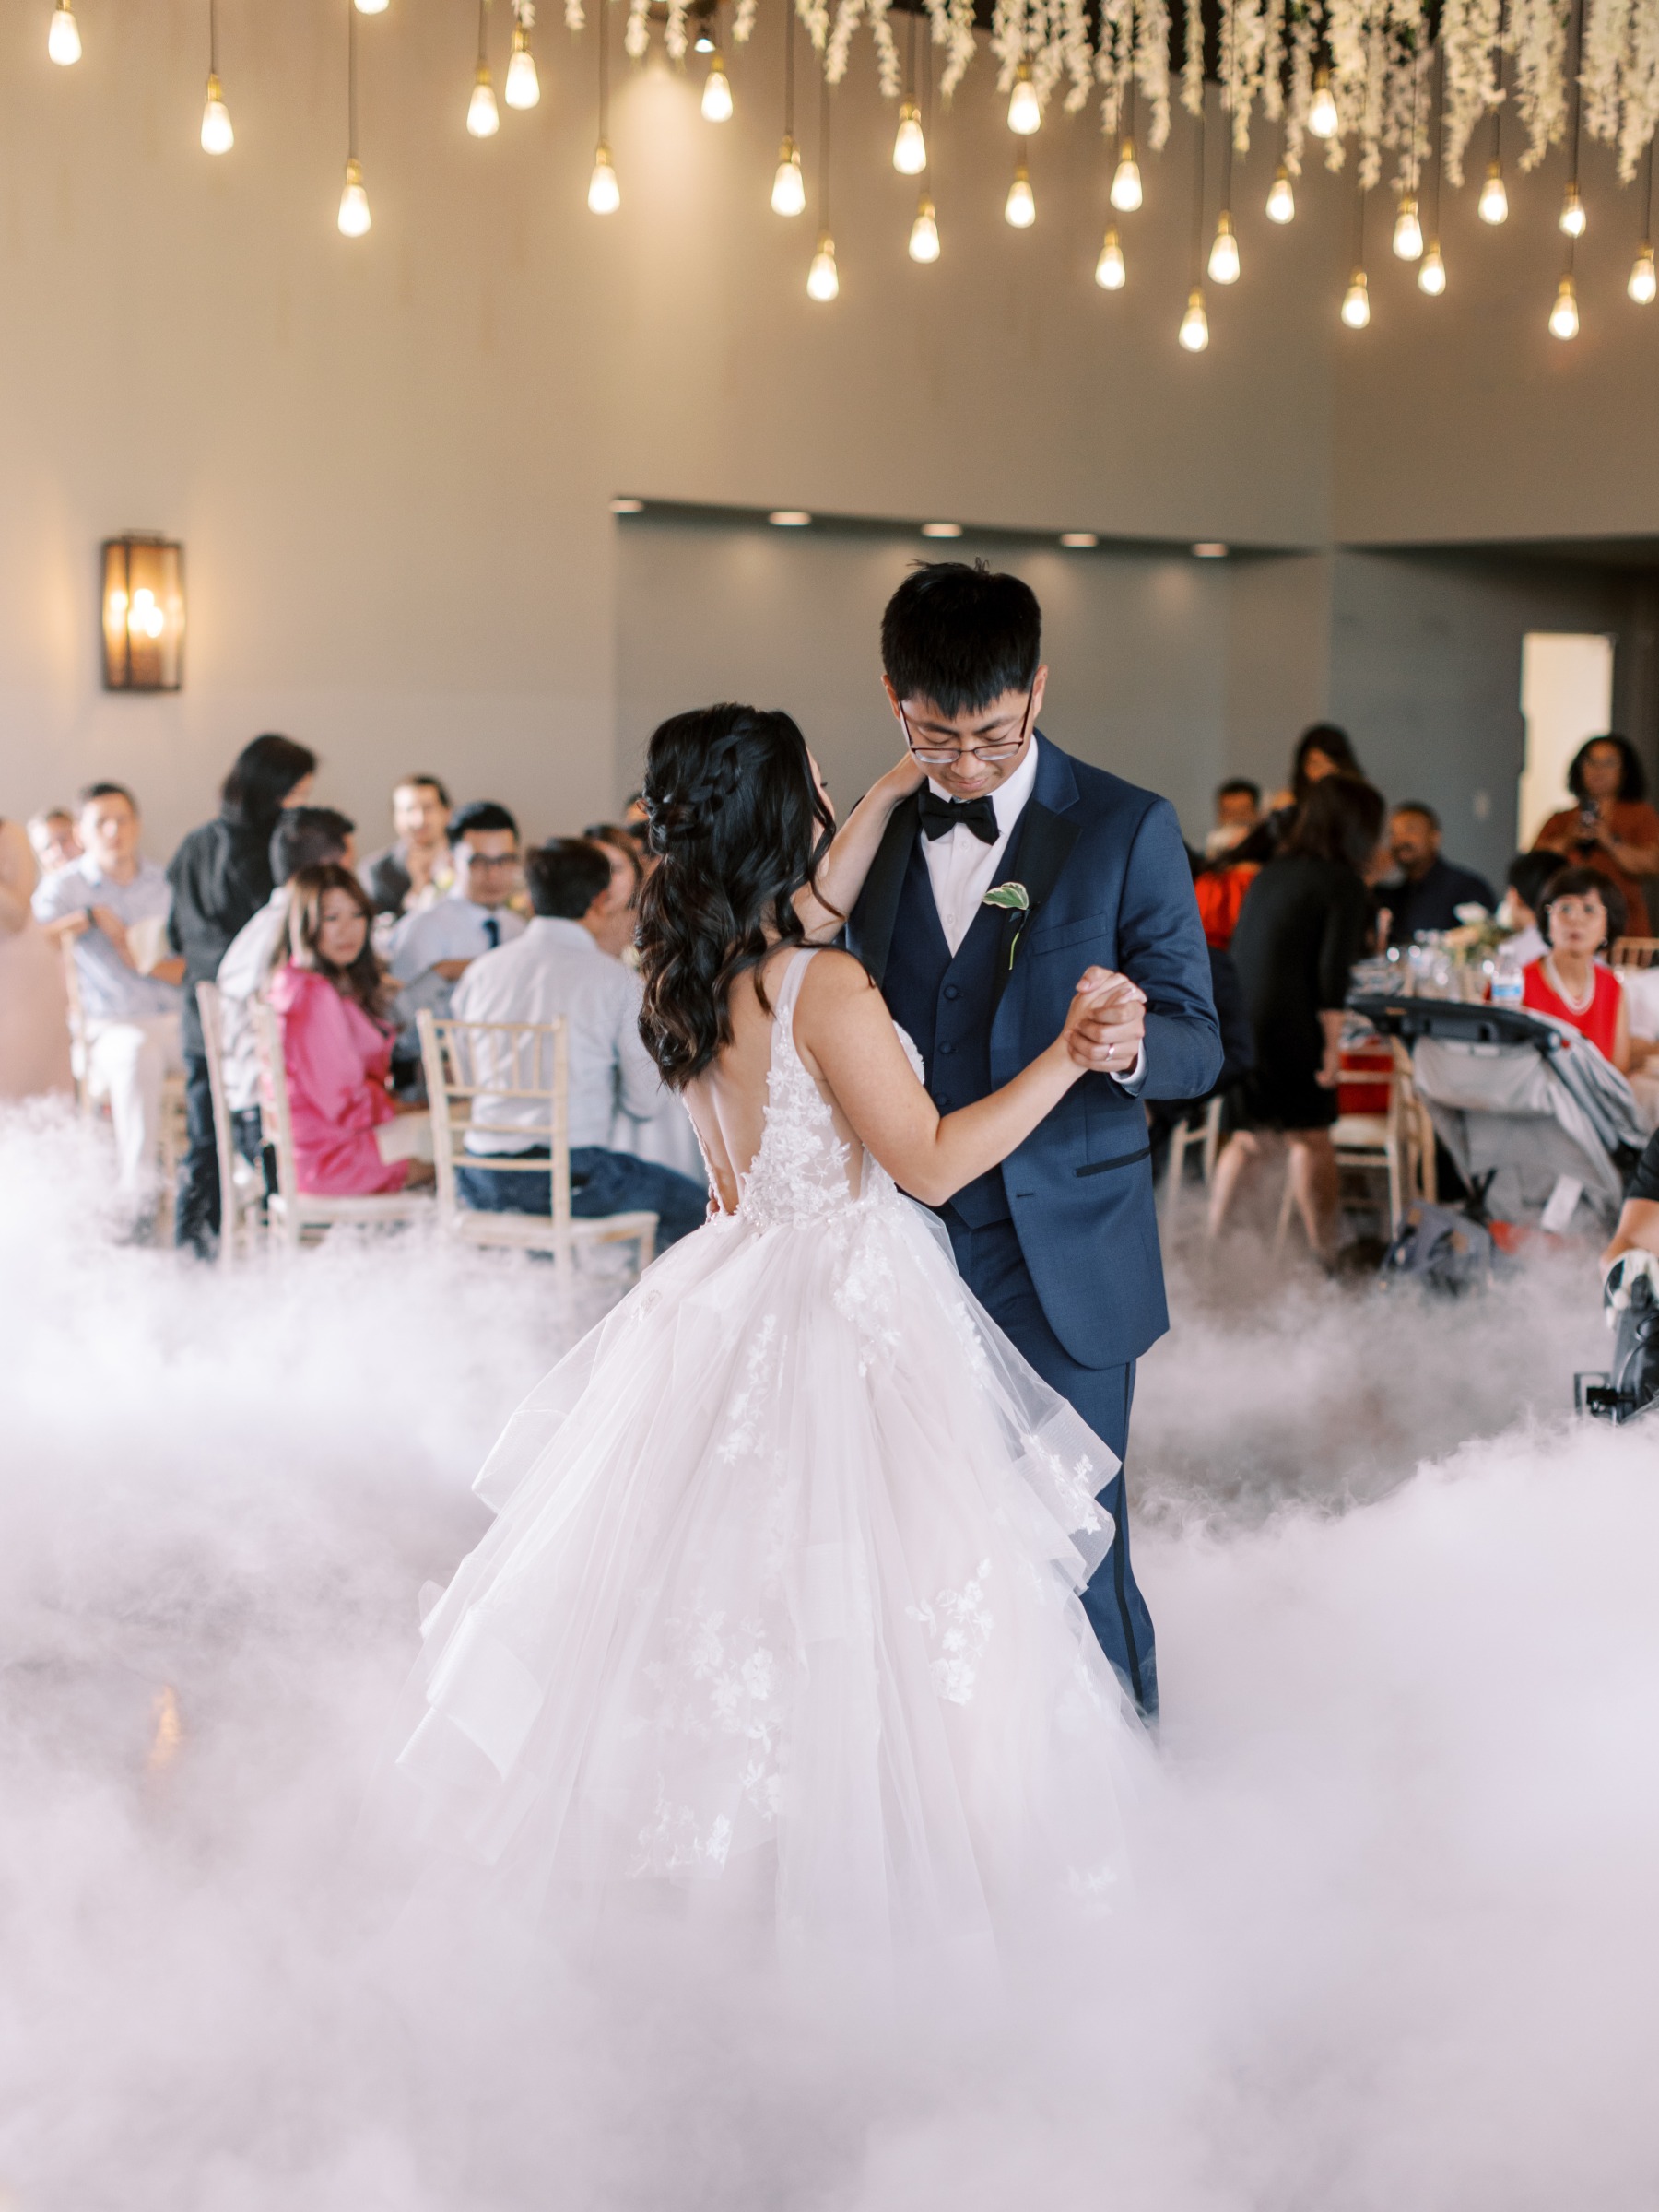 cloud-inspired first dance